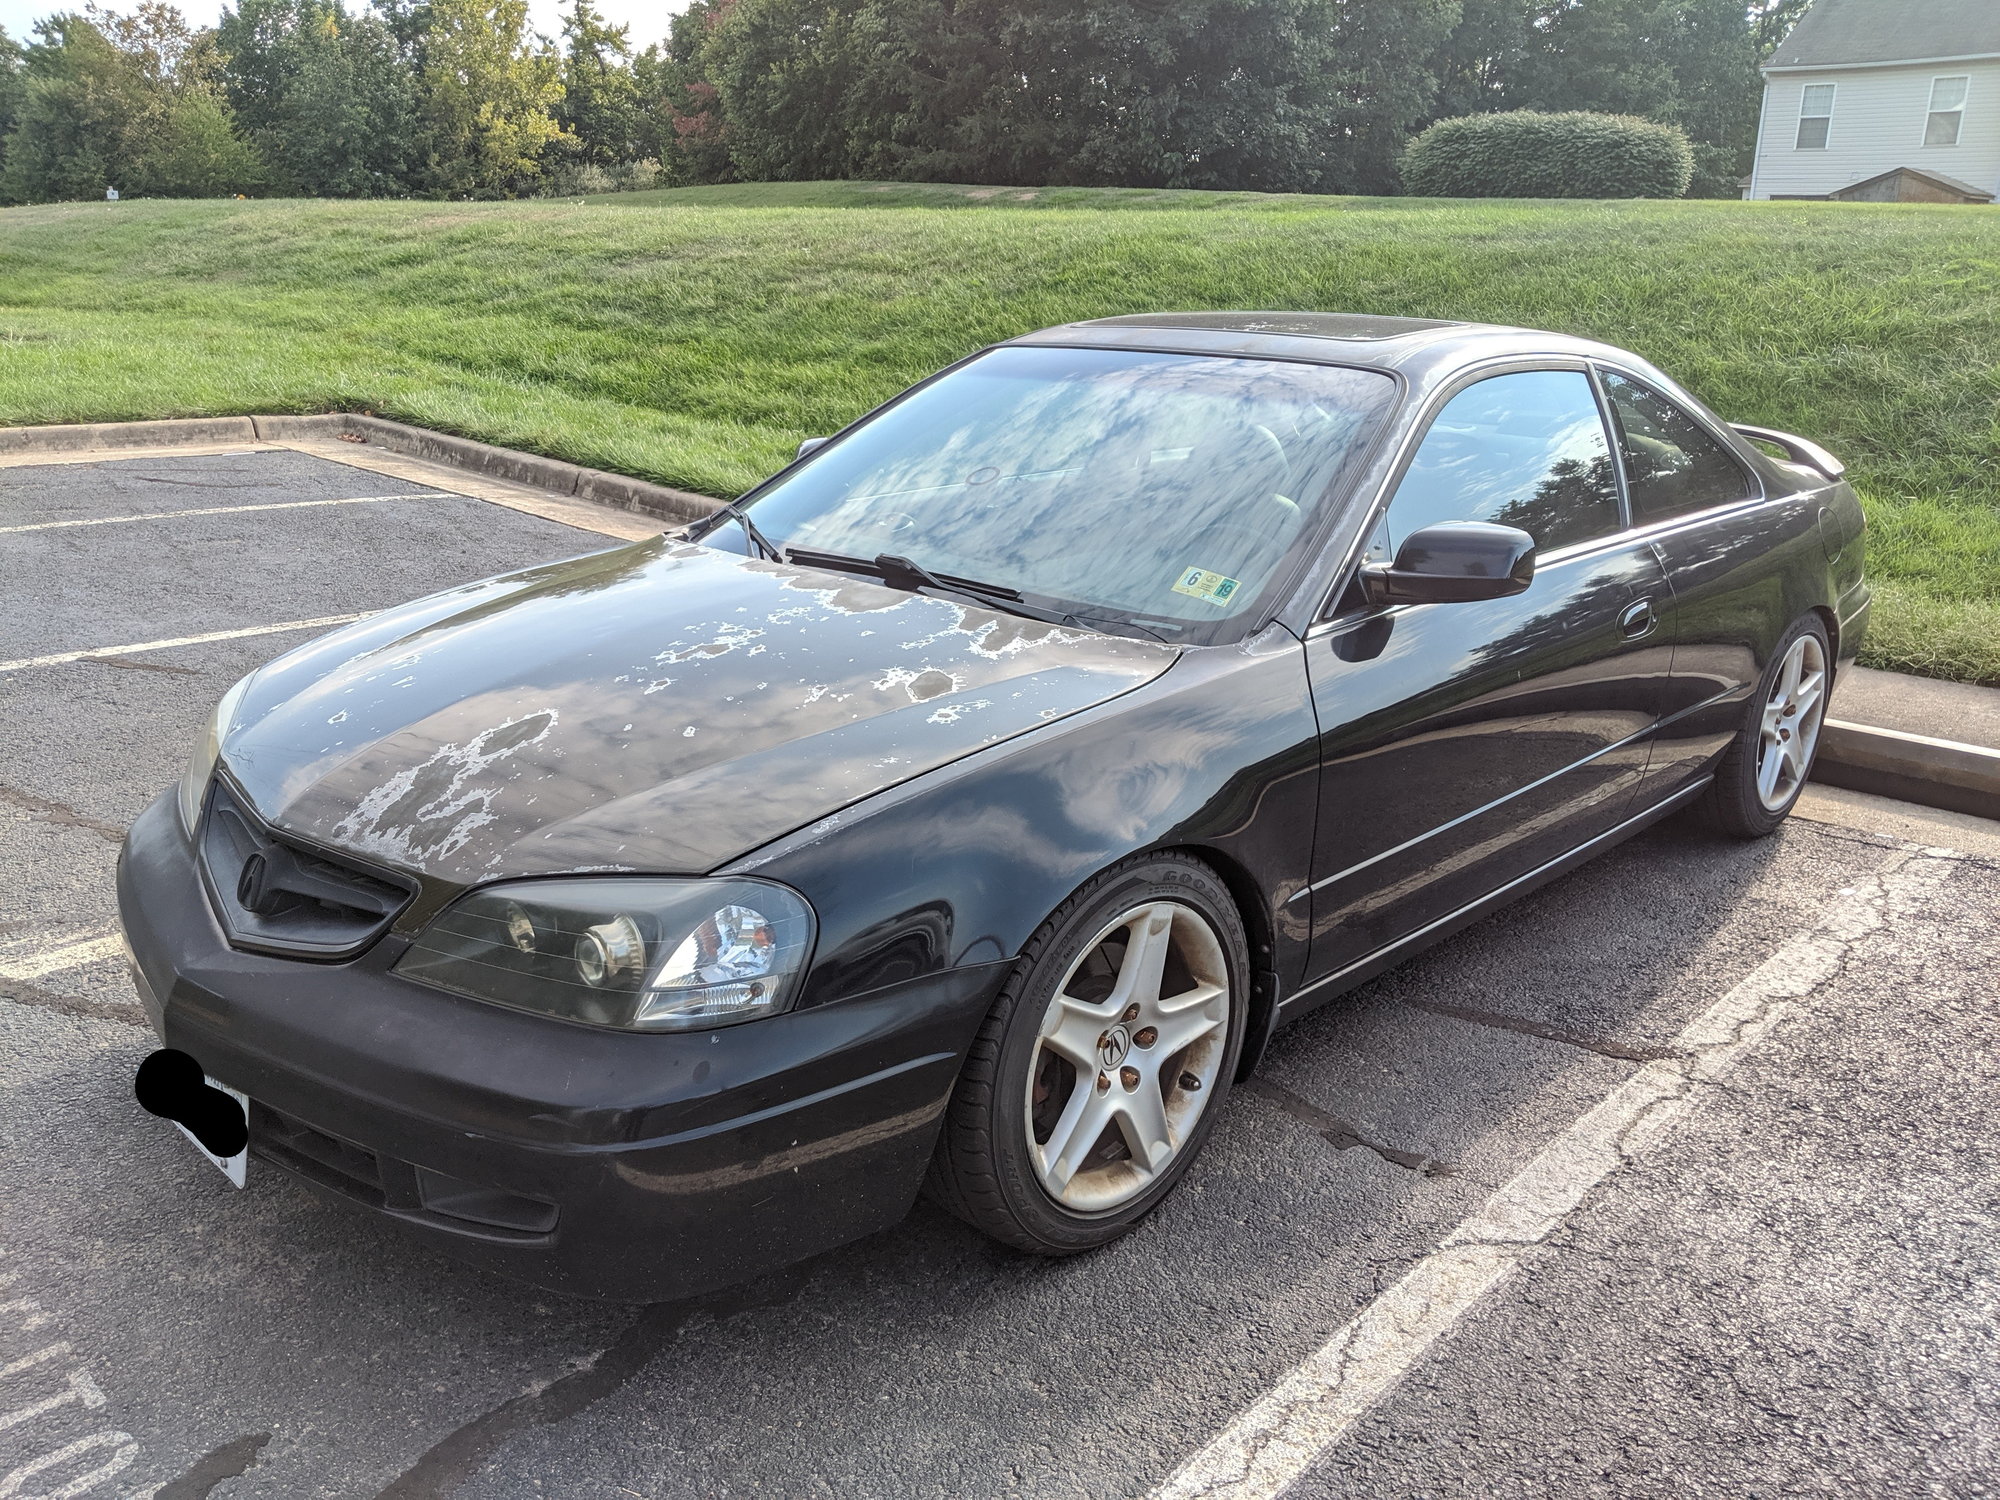 2003 Acura CL - SOLD: 2003 Acura CL Type-S 6 Speed - Used - VIN 19UYA41613A000941 - 187,000 Miles - 6 cyl - 2WD - Manual - Coupe - Black - Fairfax, VA 22033, United States